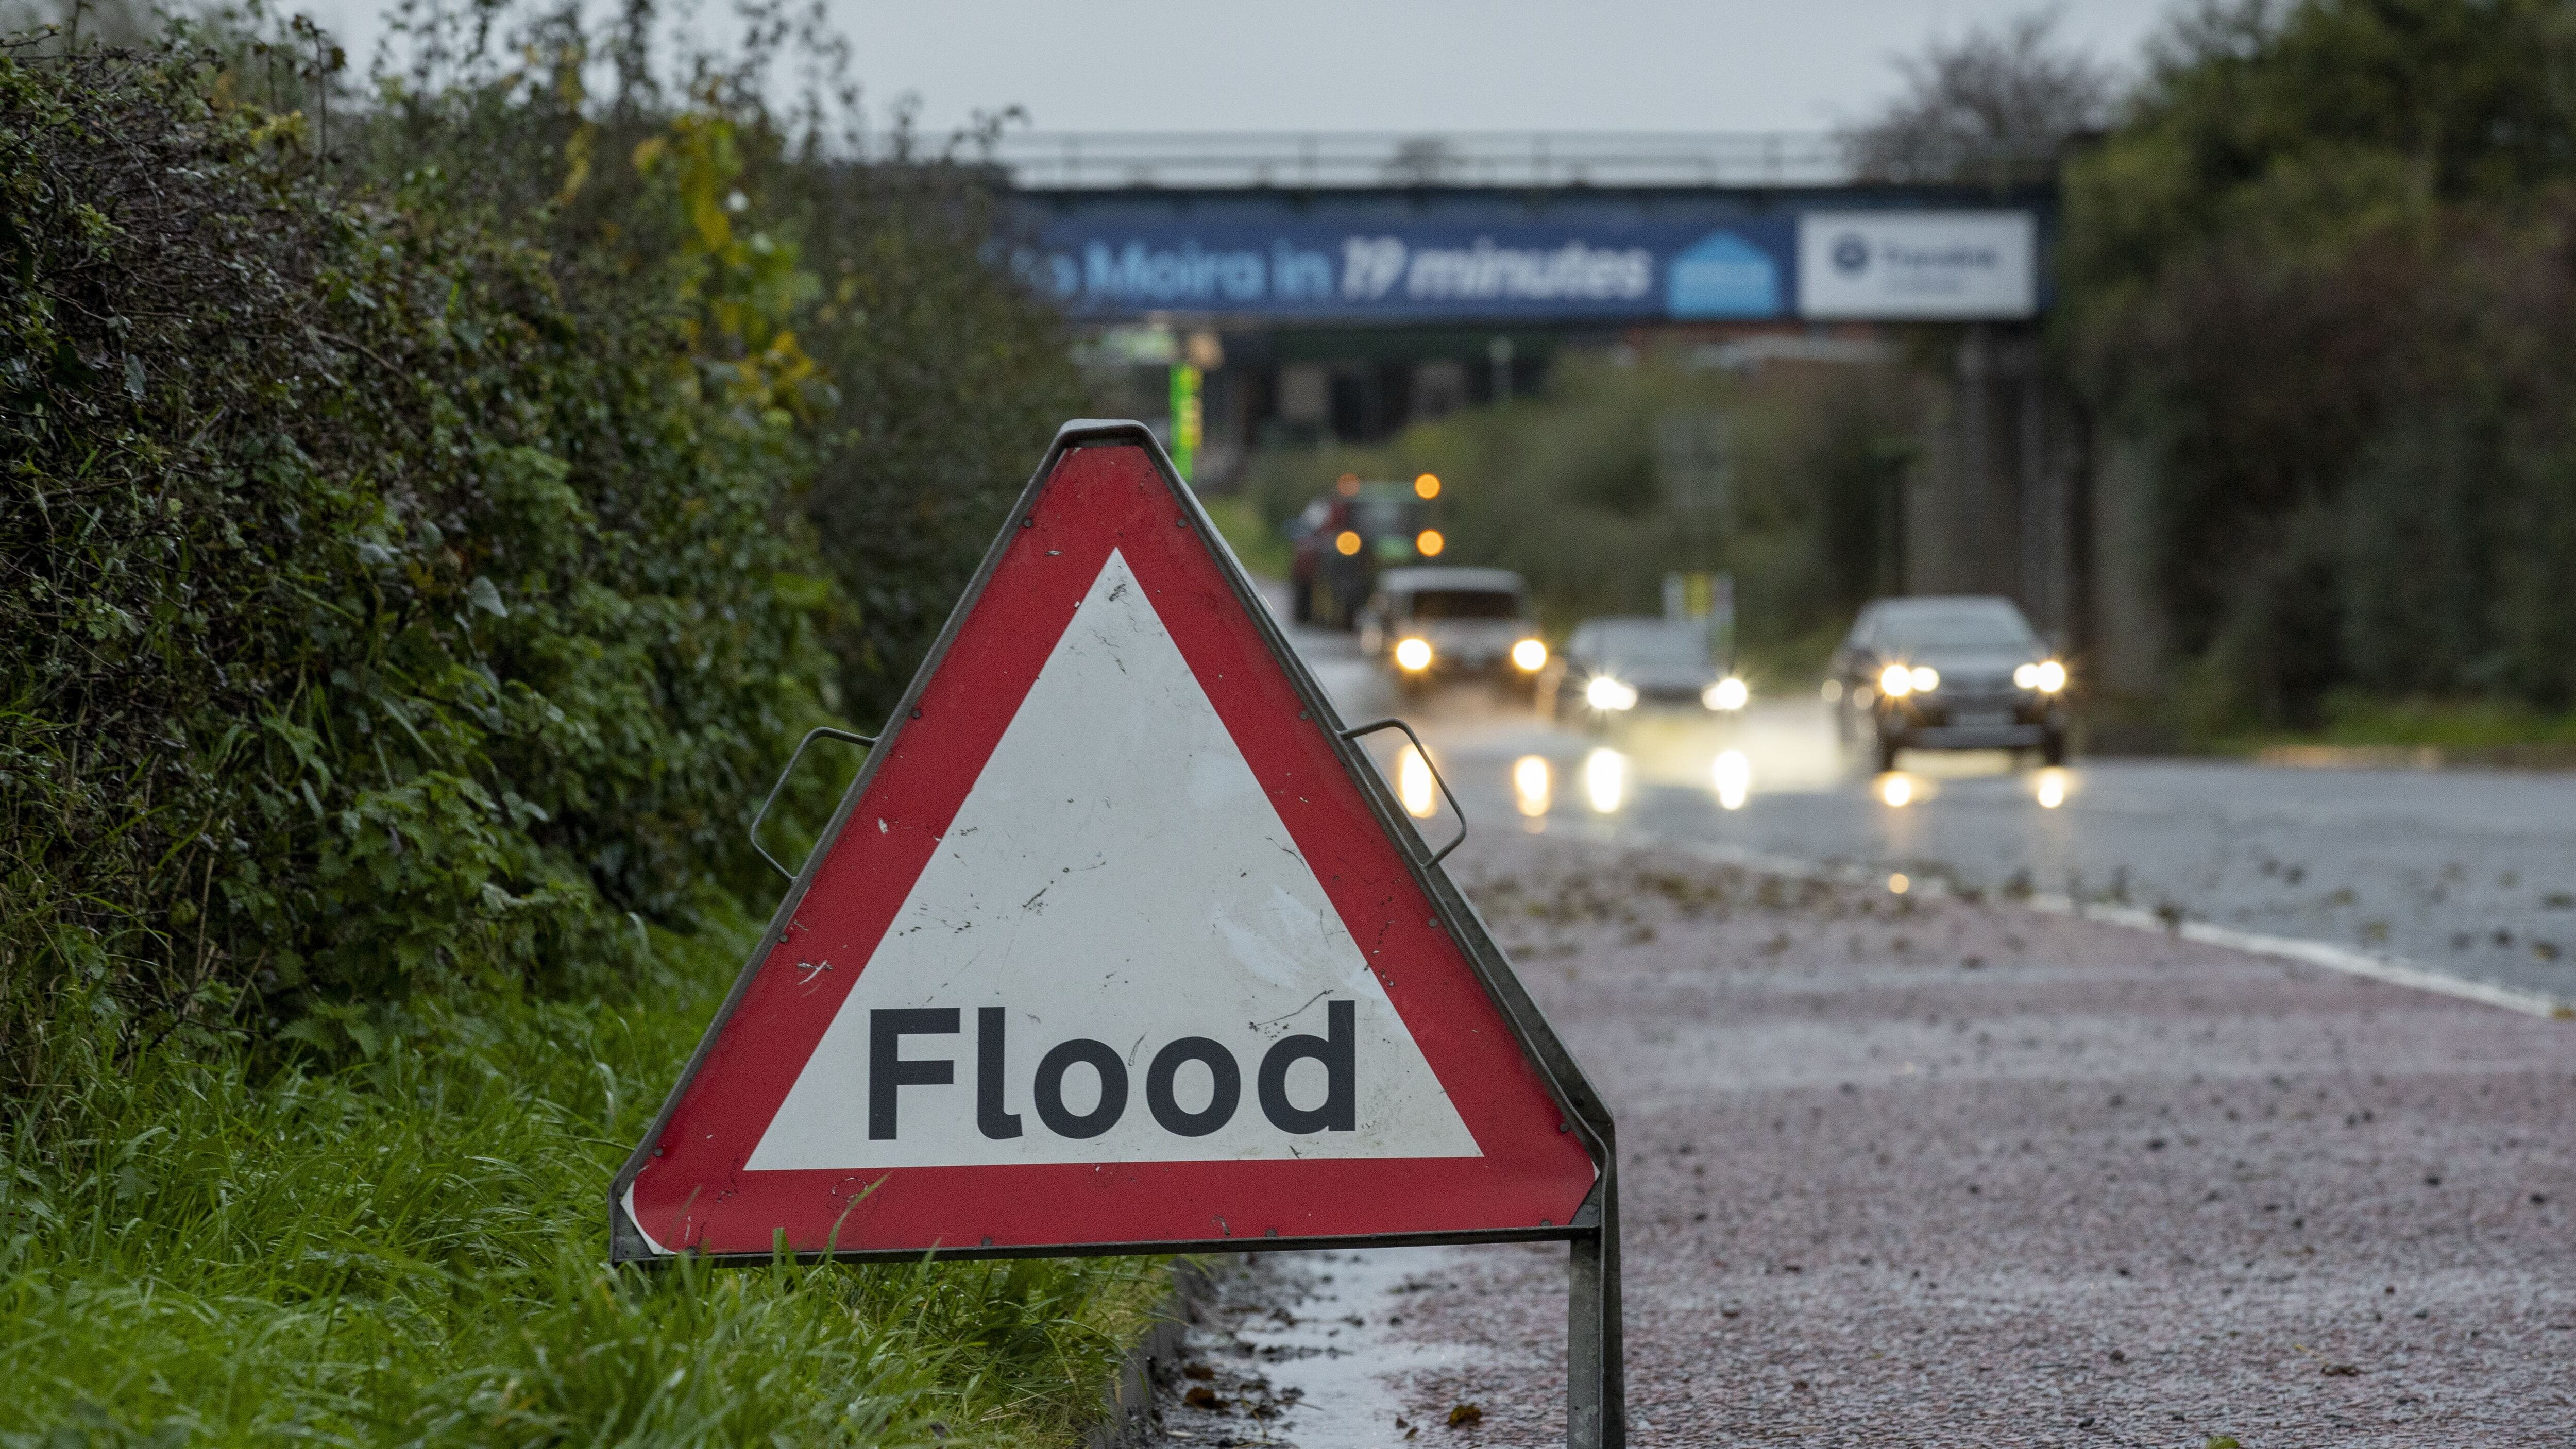 A road sign advising drivers of flooding on the A26 outside Moira in Northern Ireland (Liam McBurney/PA)